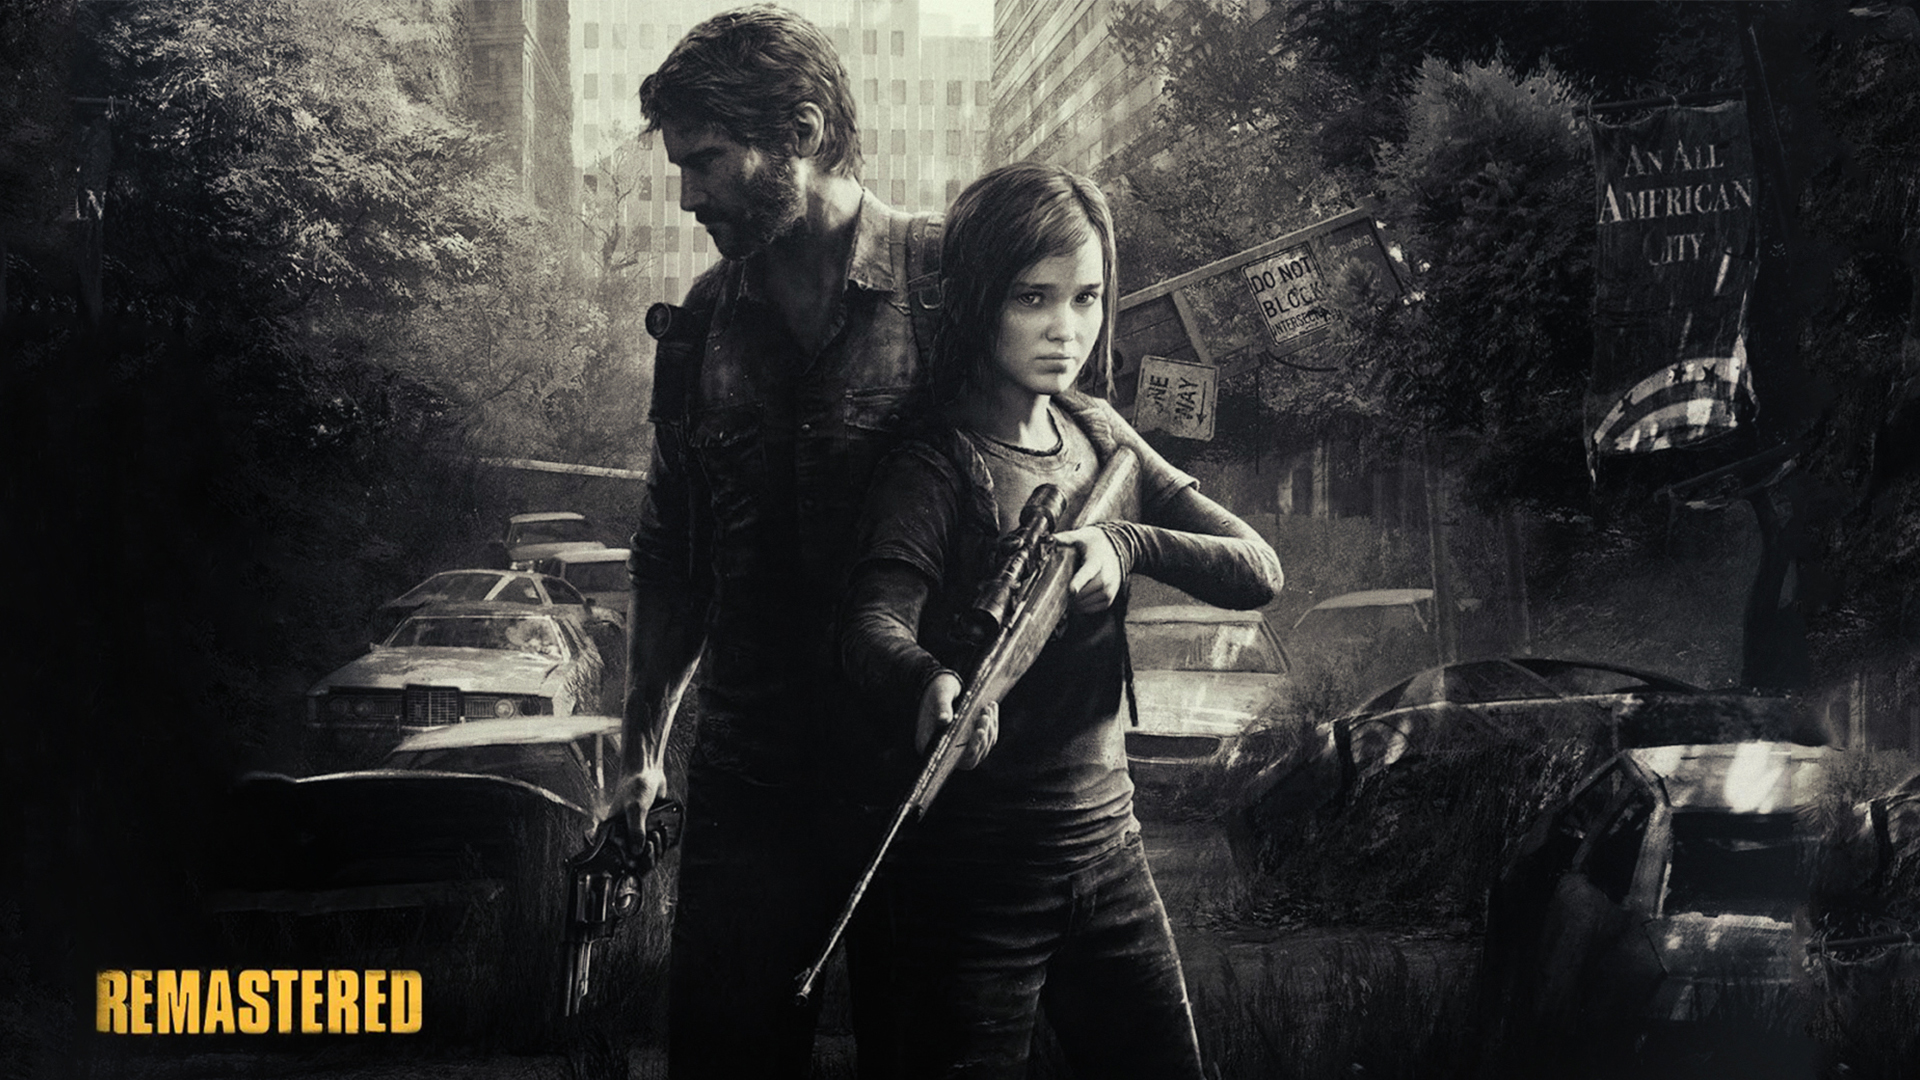 Last Of Us Remastered Wallpapers, The Last Of Us Remastered - Last Of Us Remastered - HD Wallpaper 